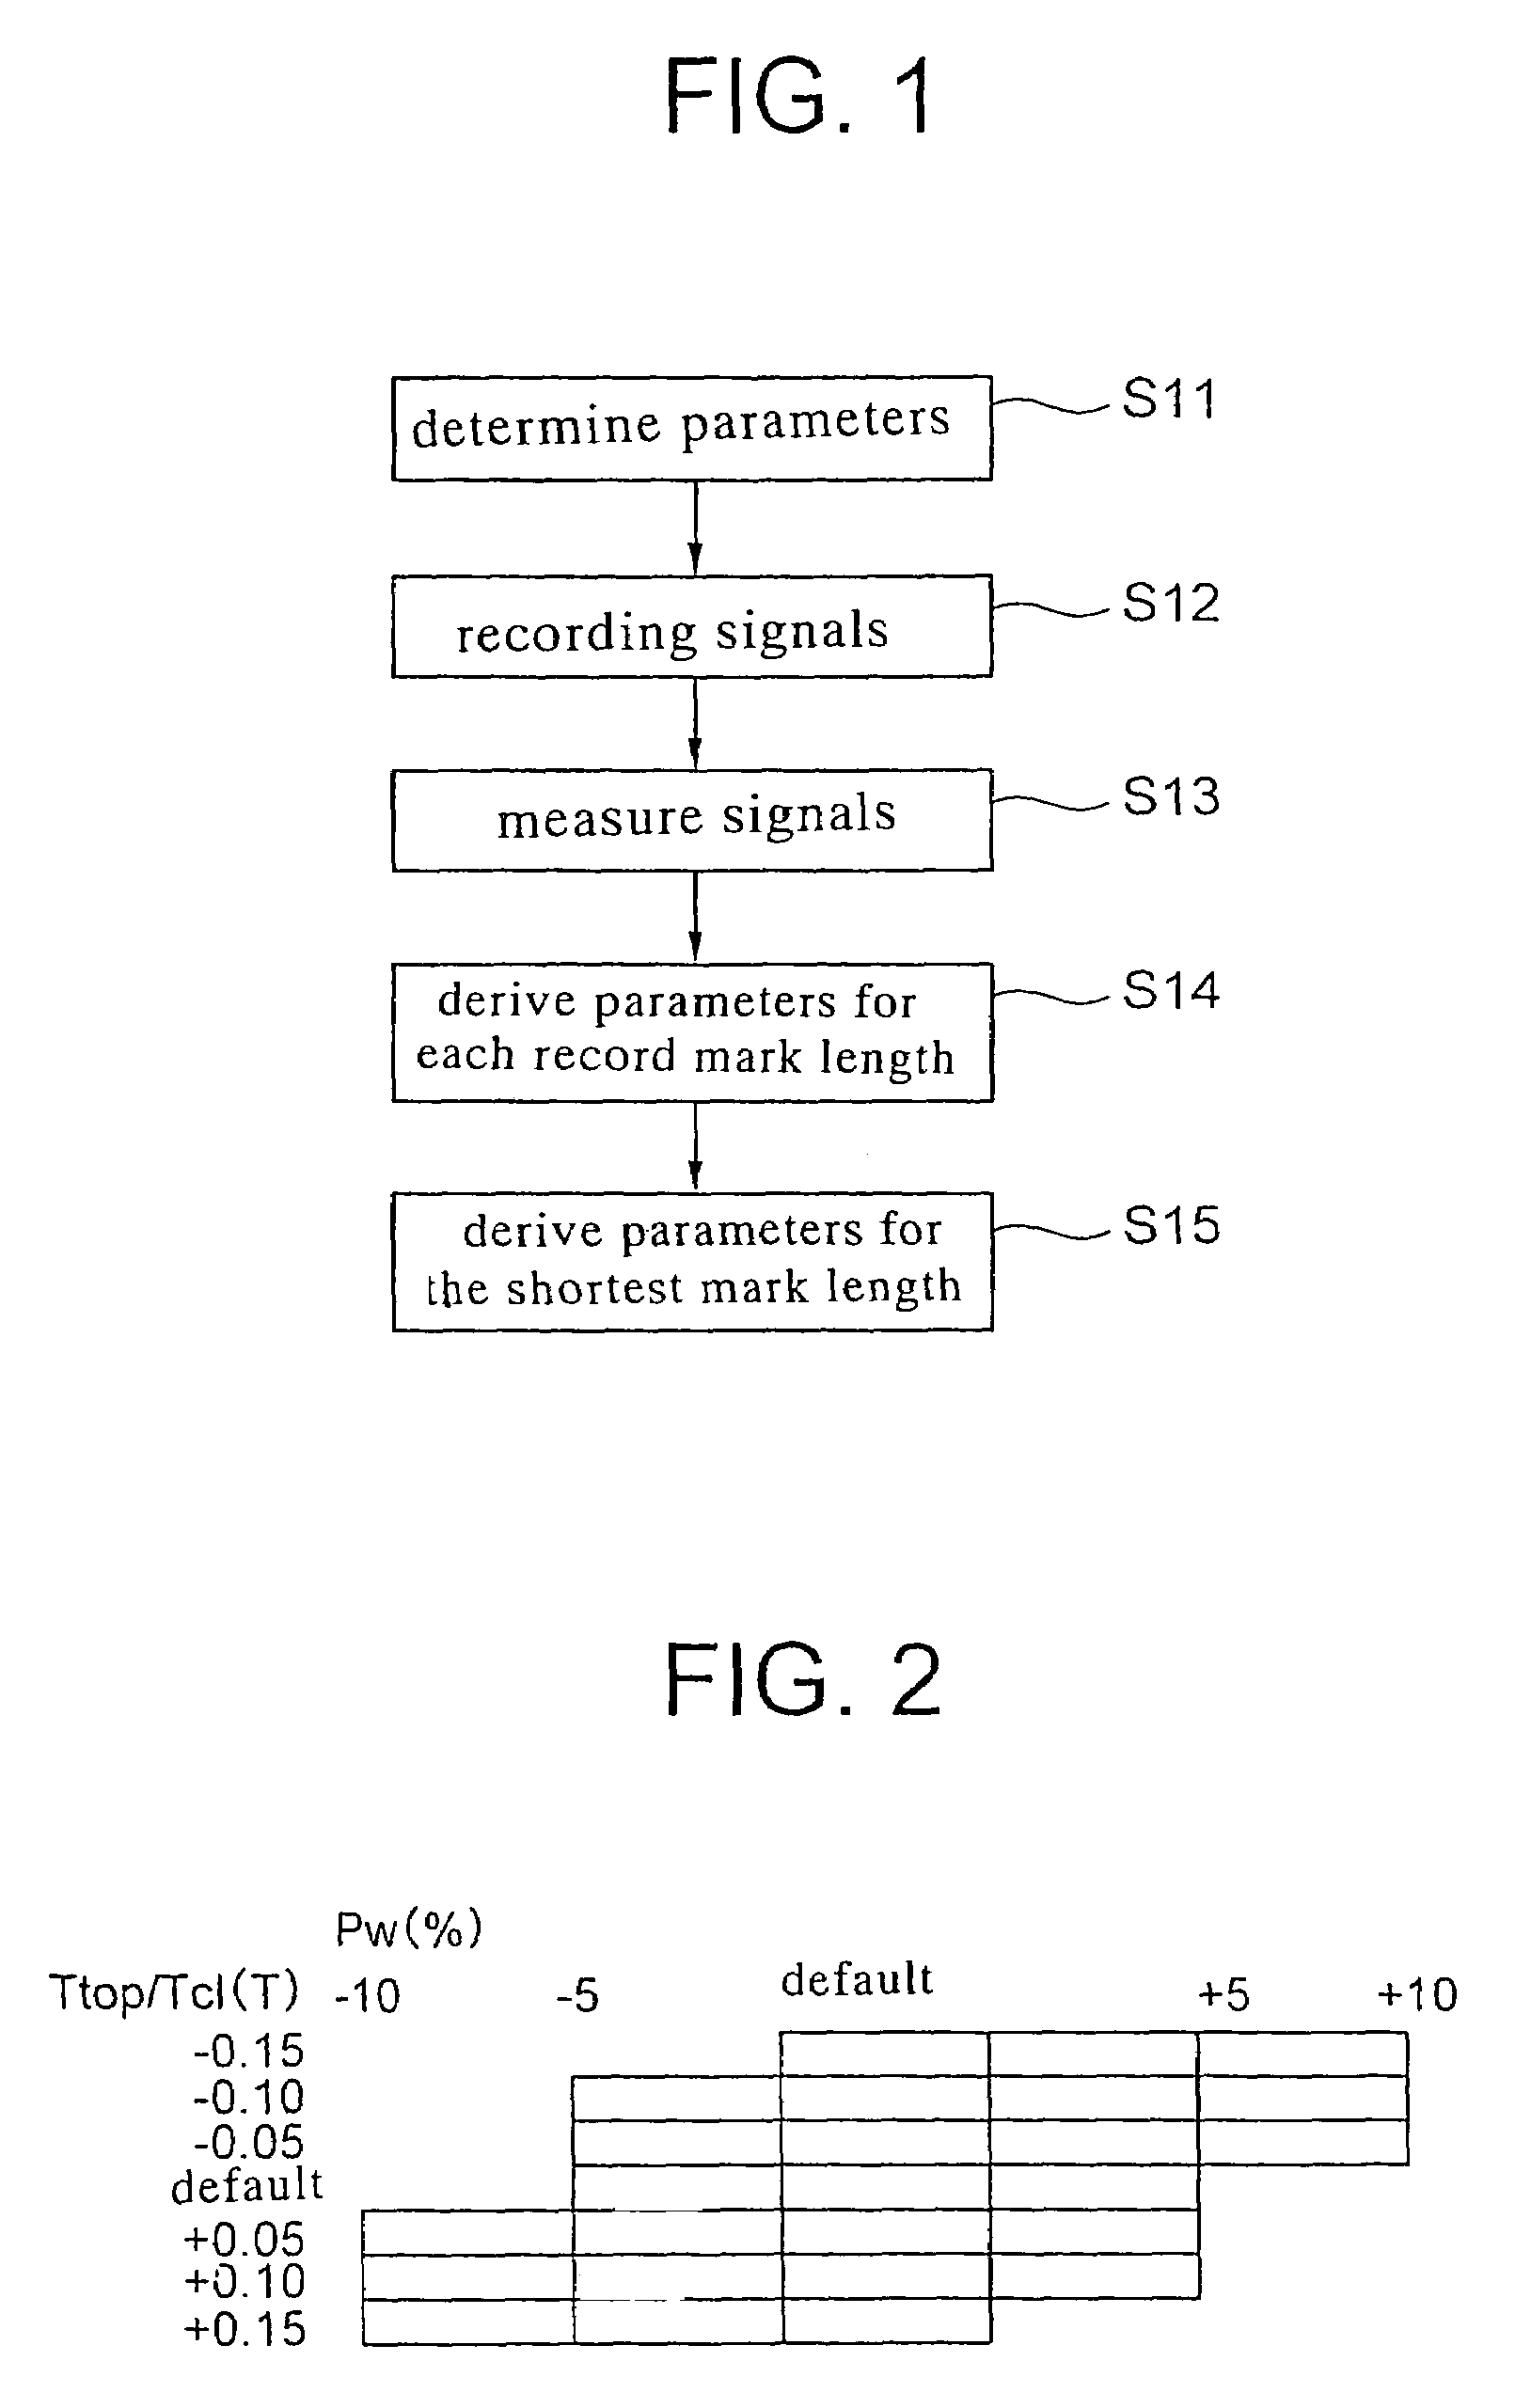 Recording condition setting method and information recorder using same